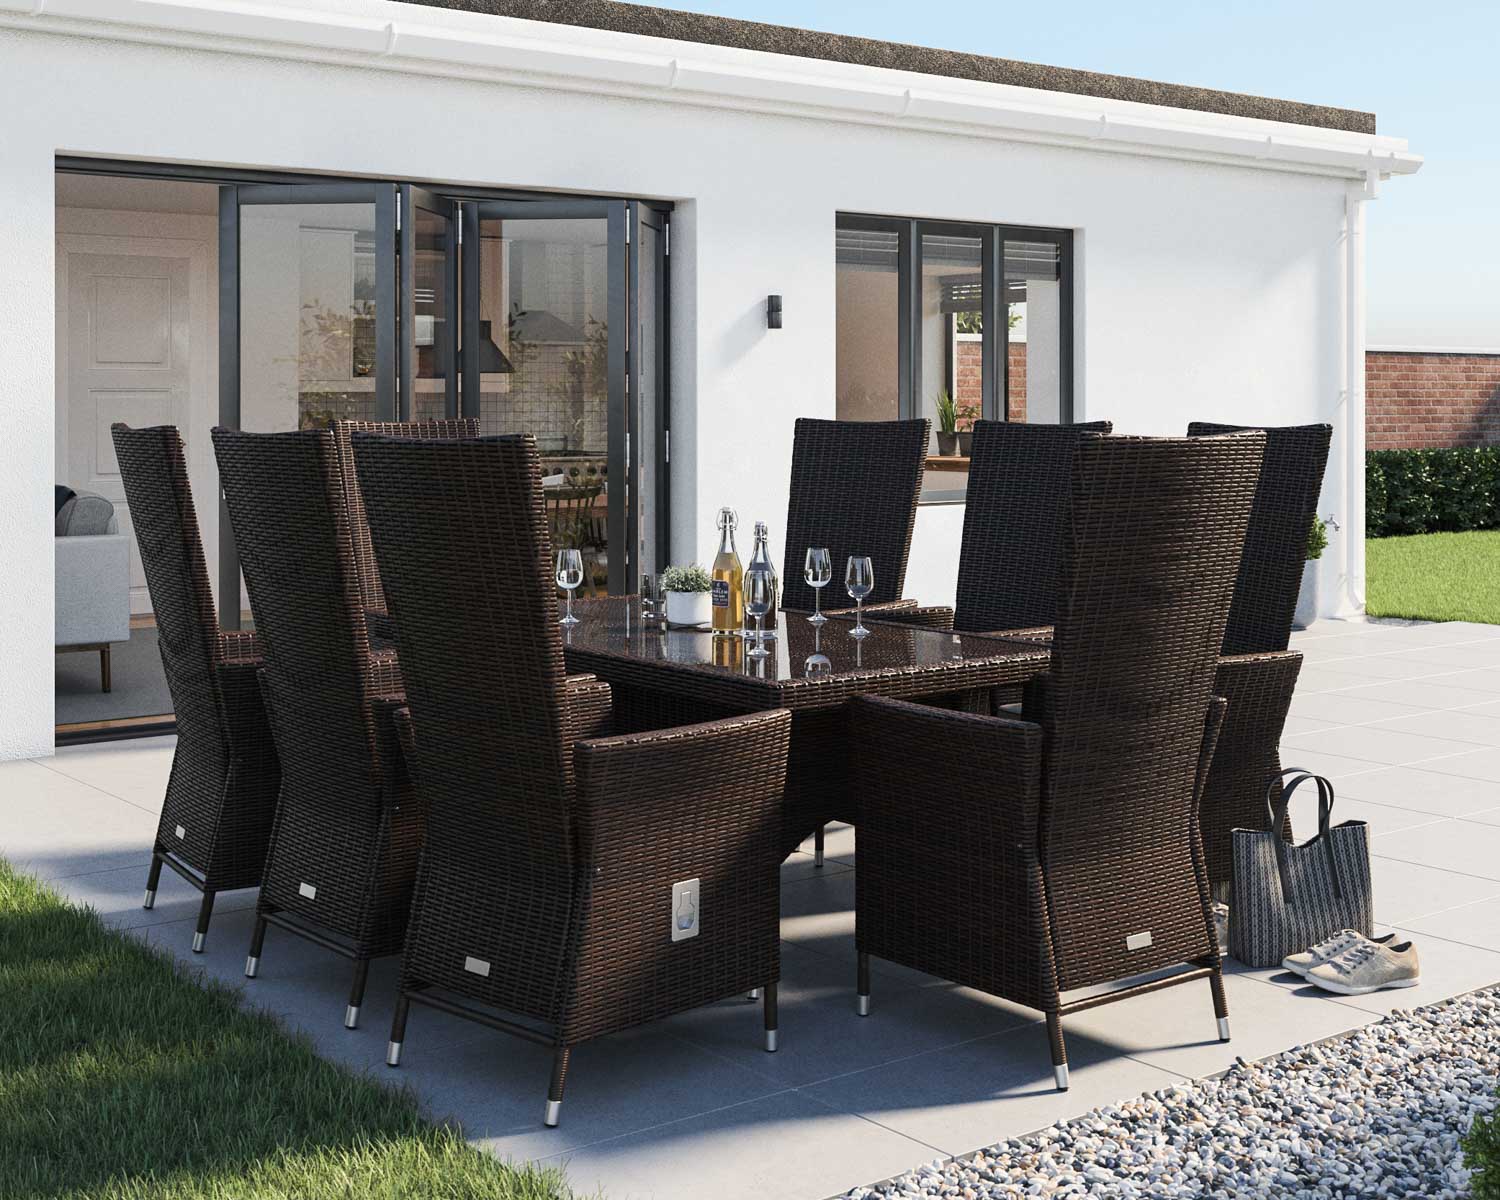 8 Seater Rattan Garden Dining Set With Rectangular Dining Table In Brown Cambridge Rattan Direct